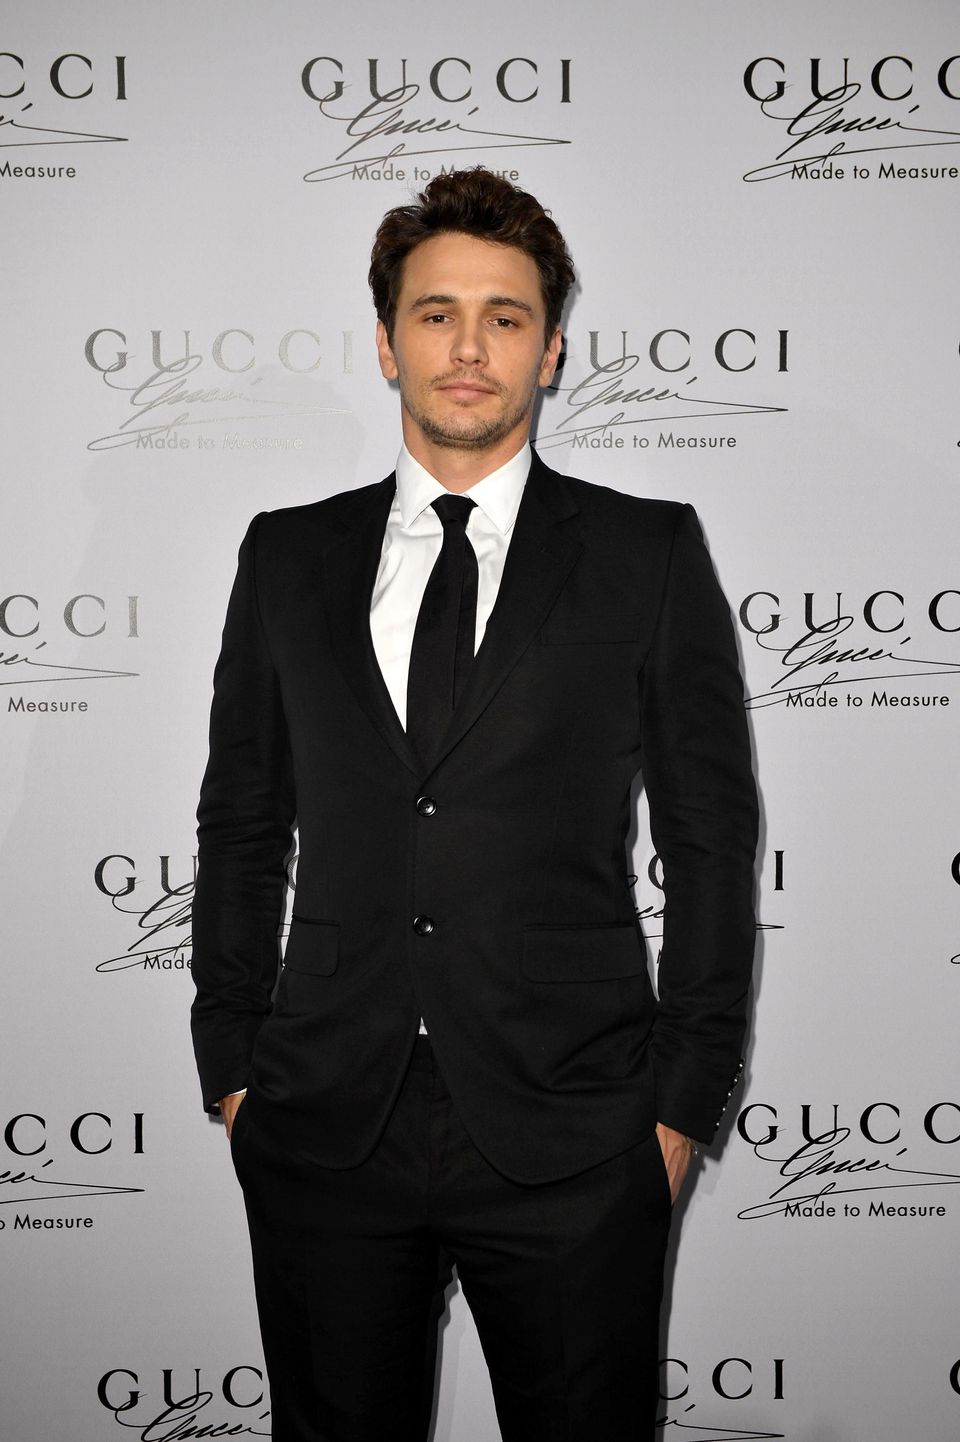 'Gucci Made to Measure Launch'